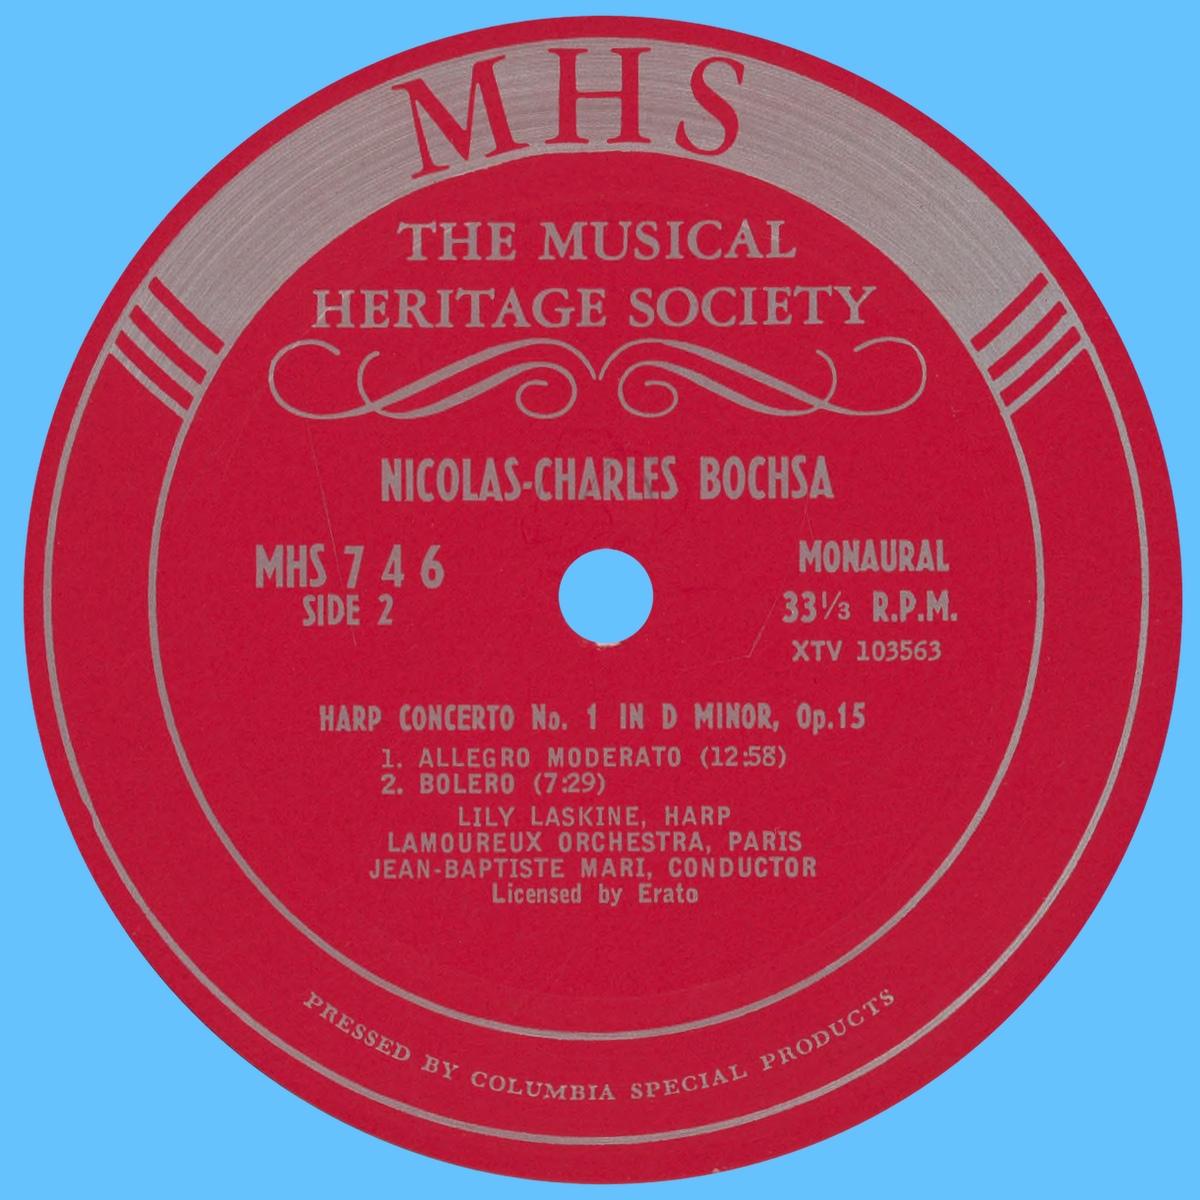 Étiquette verso du disque The Musical Heritage Society Inc. MHS 746